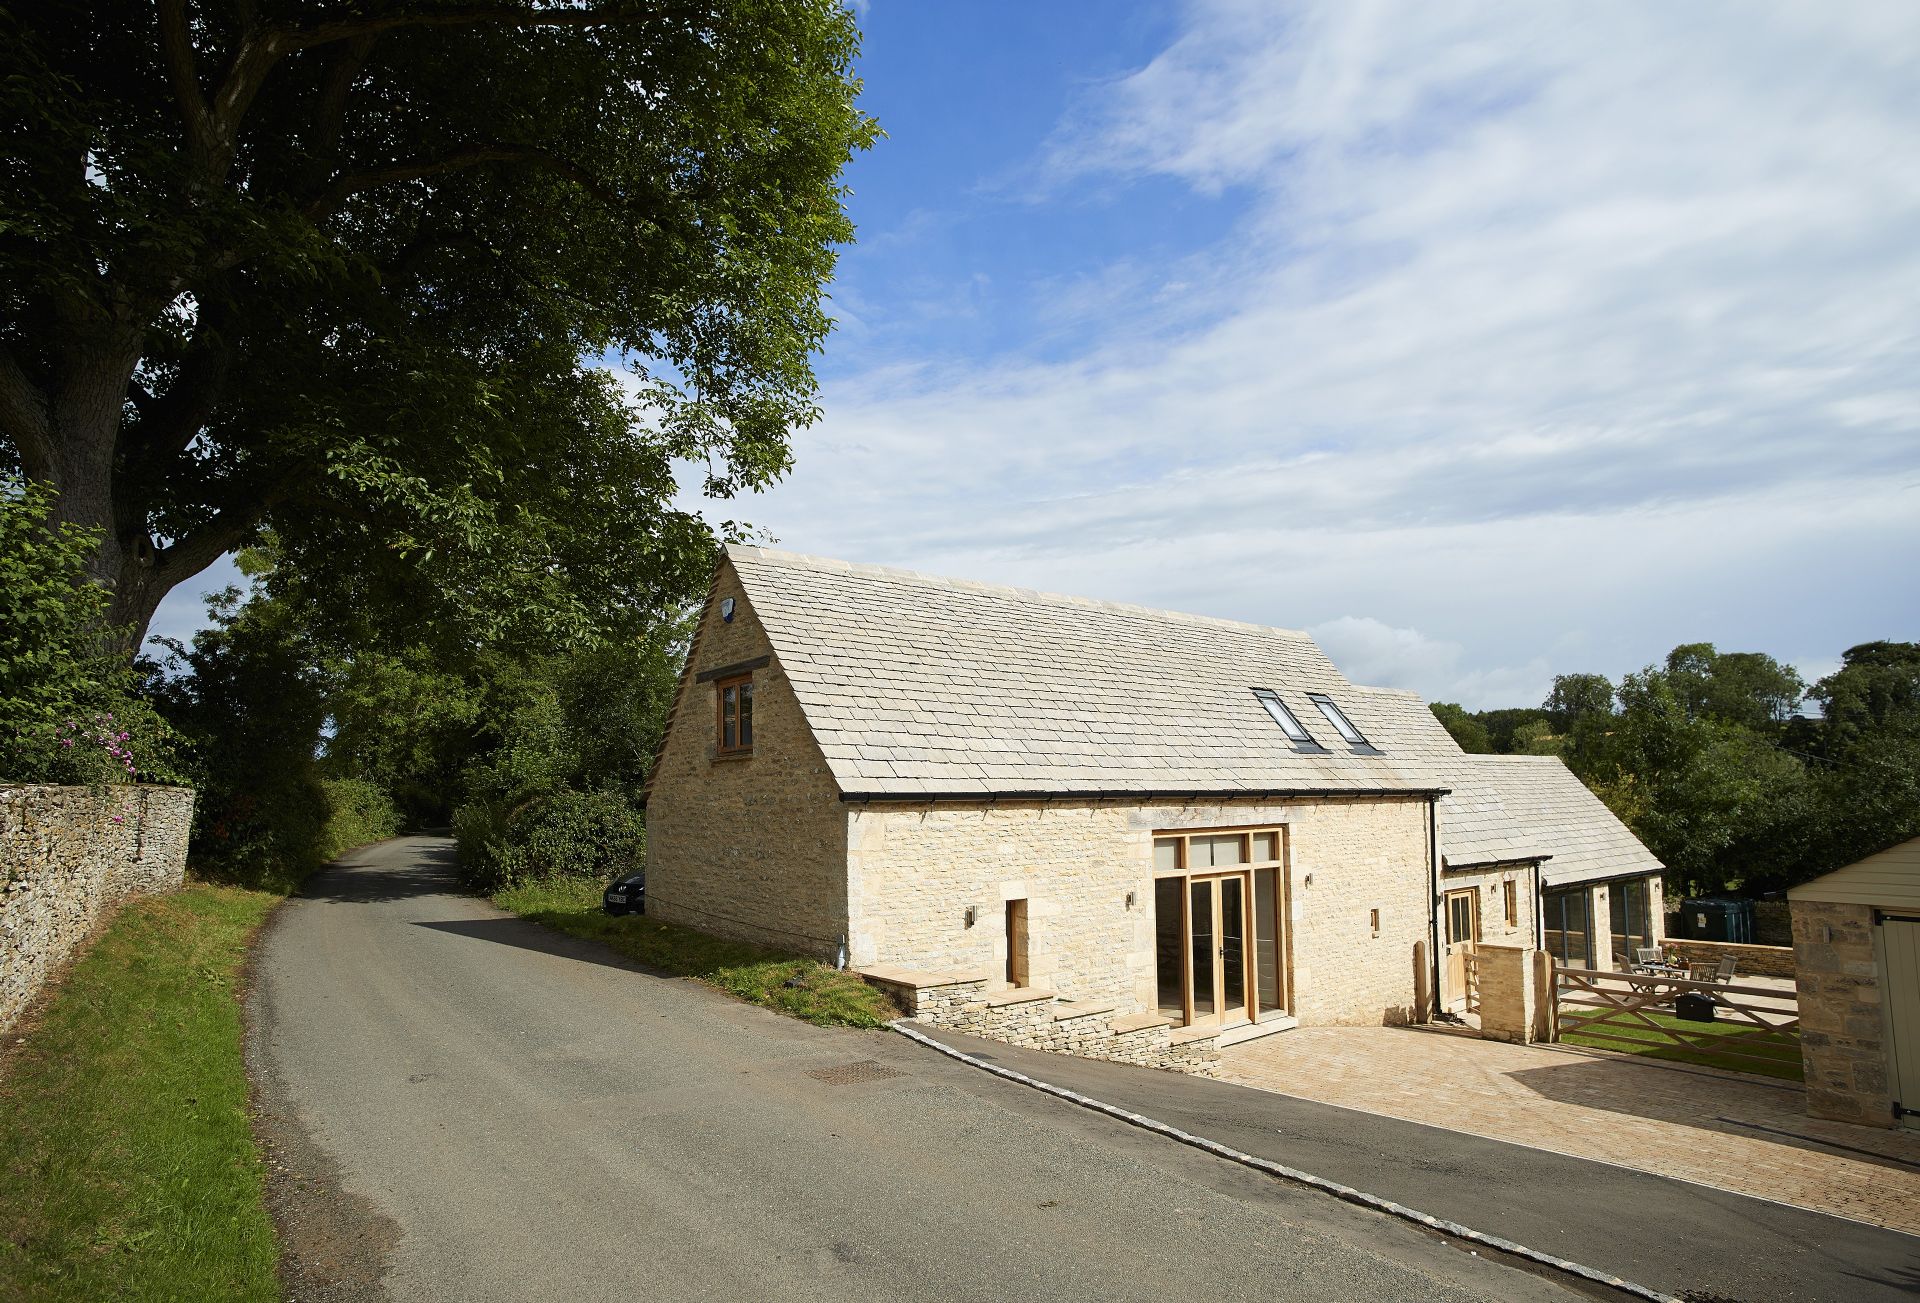 More information about Rosebank Barn - ideal for a family holiday